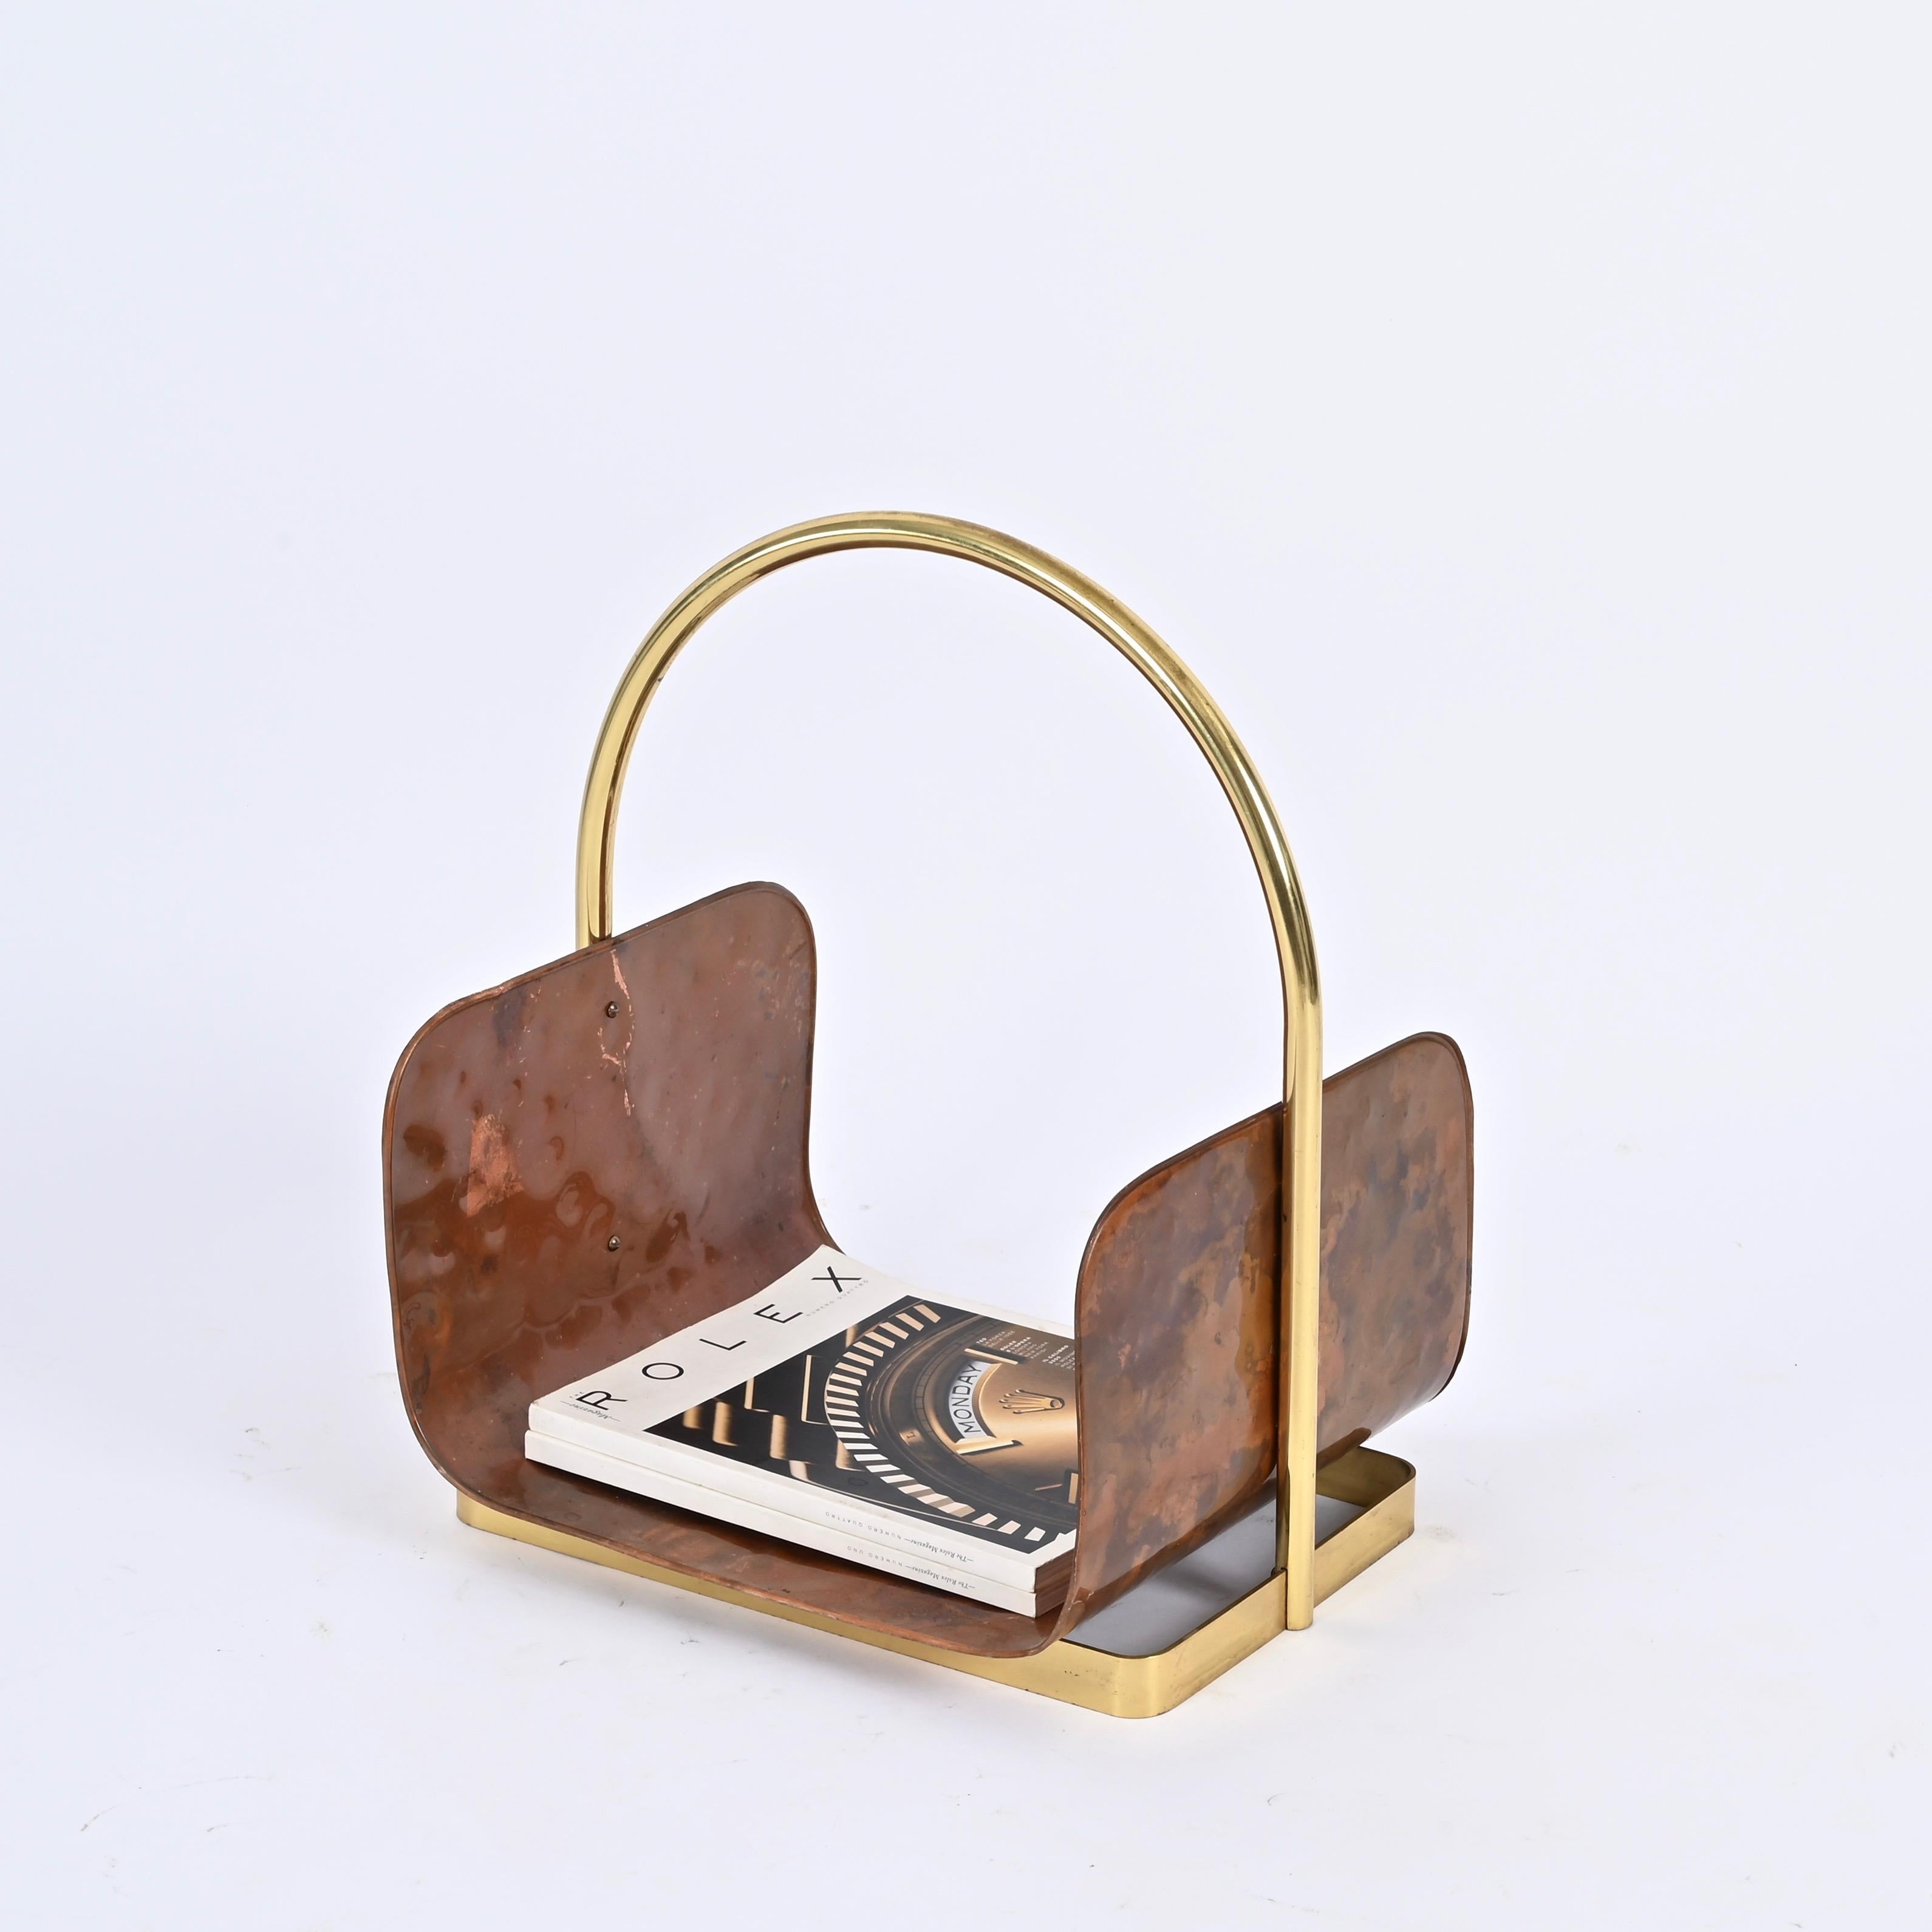 Midcentury Italian Magazine Rack in Hammered Copper and Brass, Italy 1970s For Sale 8